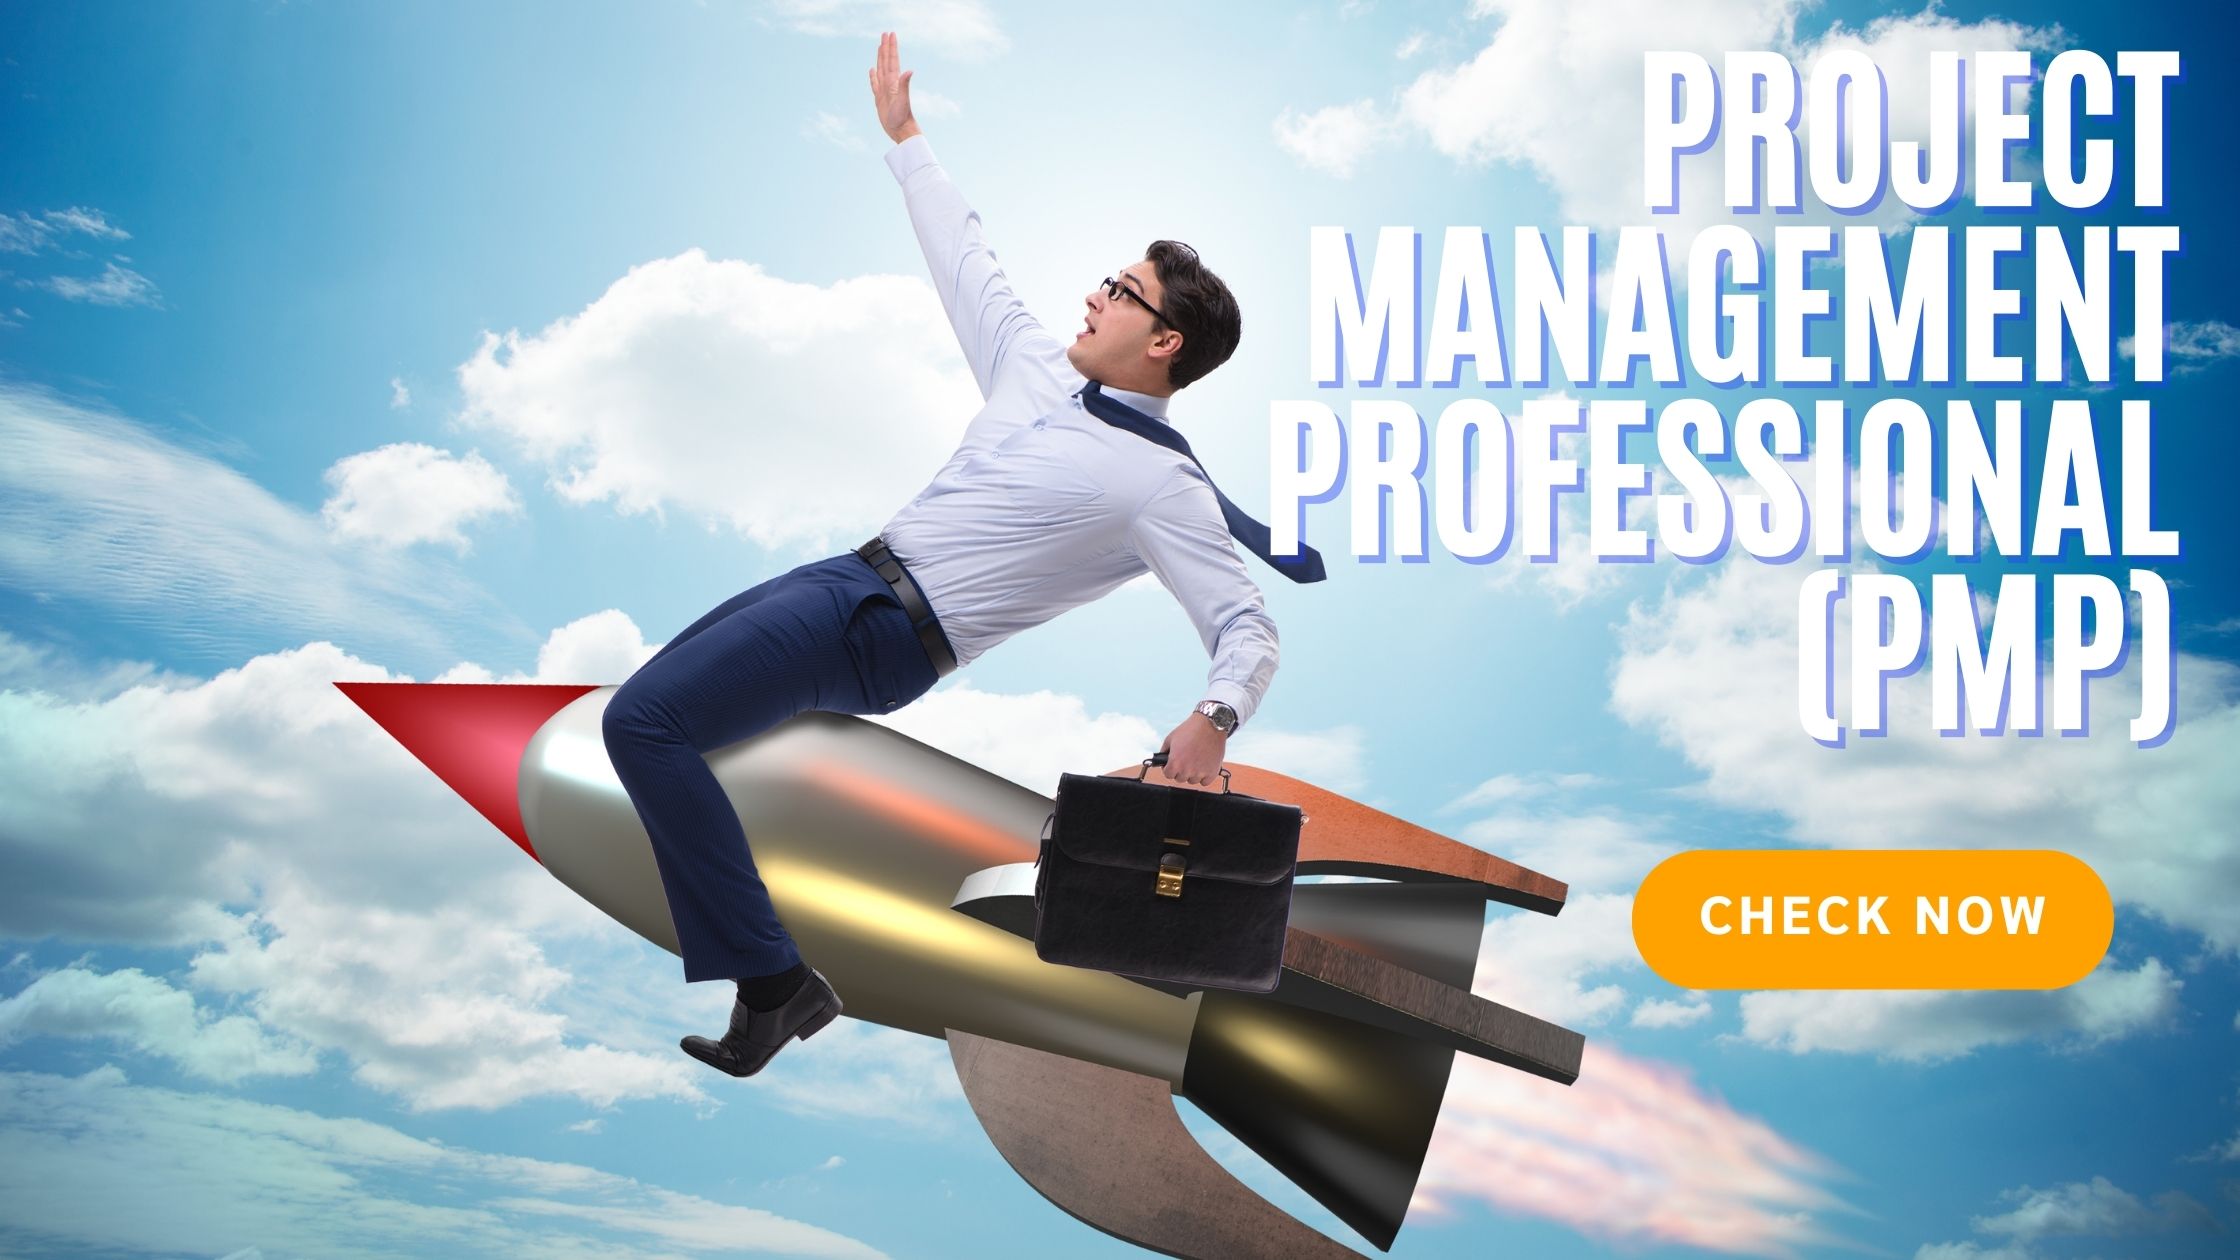 Career path for Project Management Professional (PMP)